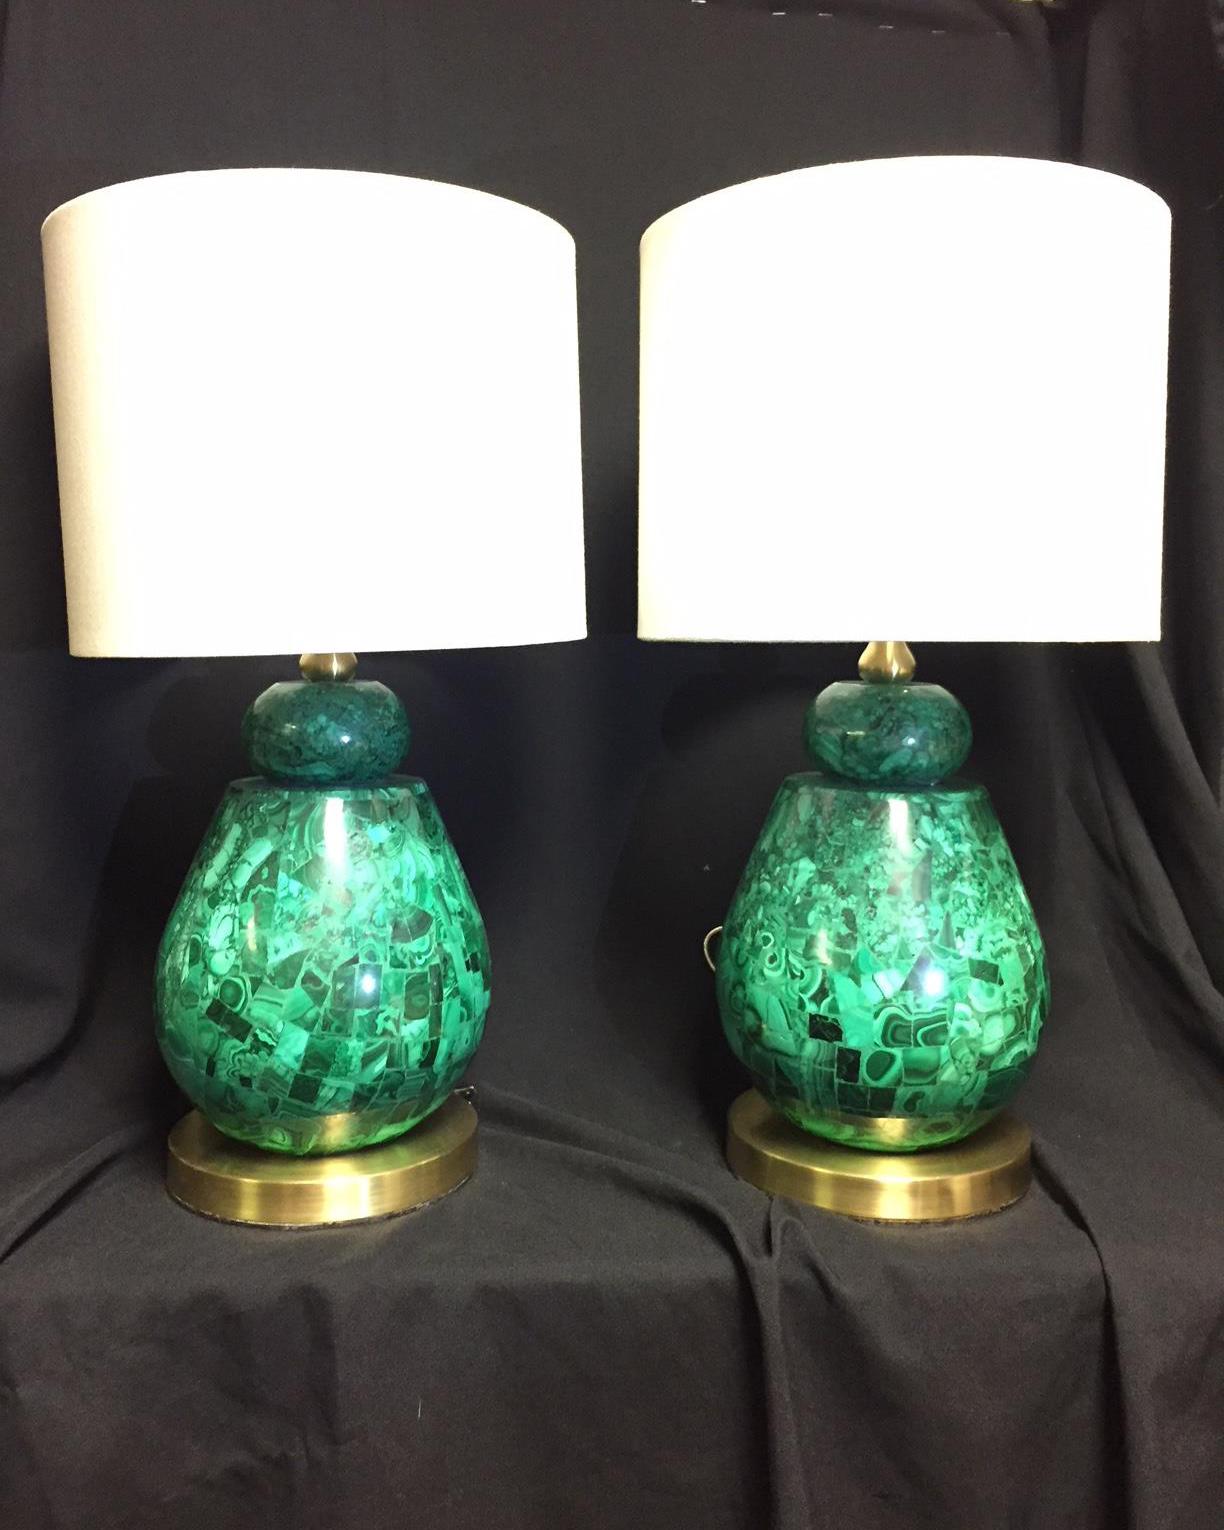 Lovely pair of brass and malachite veneered lamps with shades. 
Cylindrical white shades over malachite inlaid baluster shaped lamps on round brass base. Polished brass hardware.

Shade and finial included. Cylindrical shades recommended.
Wiring